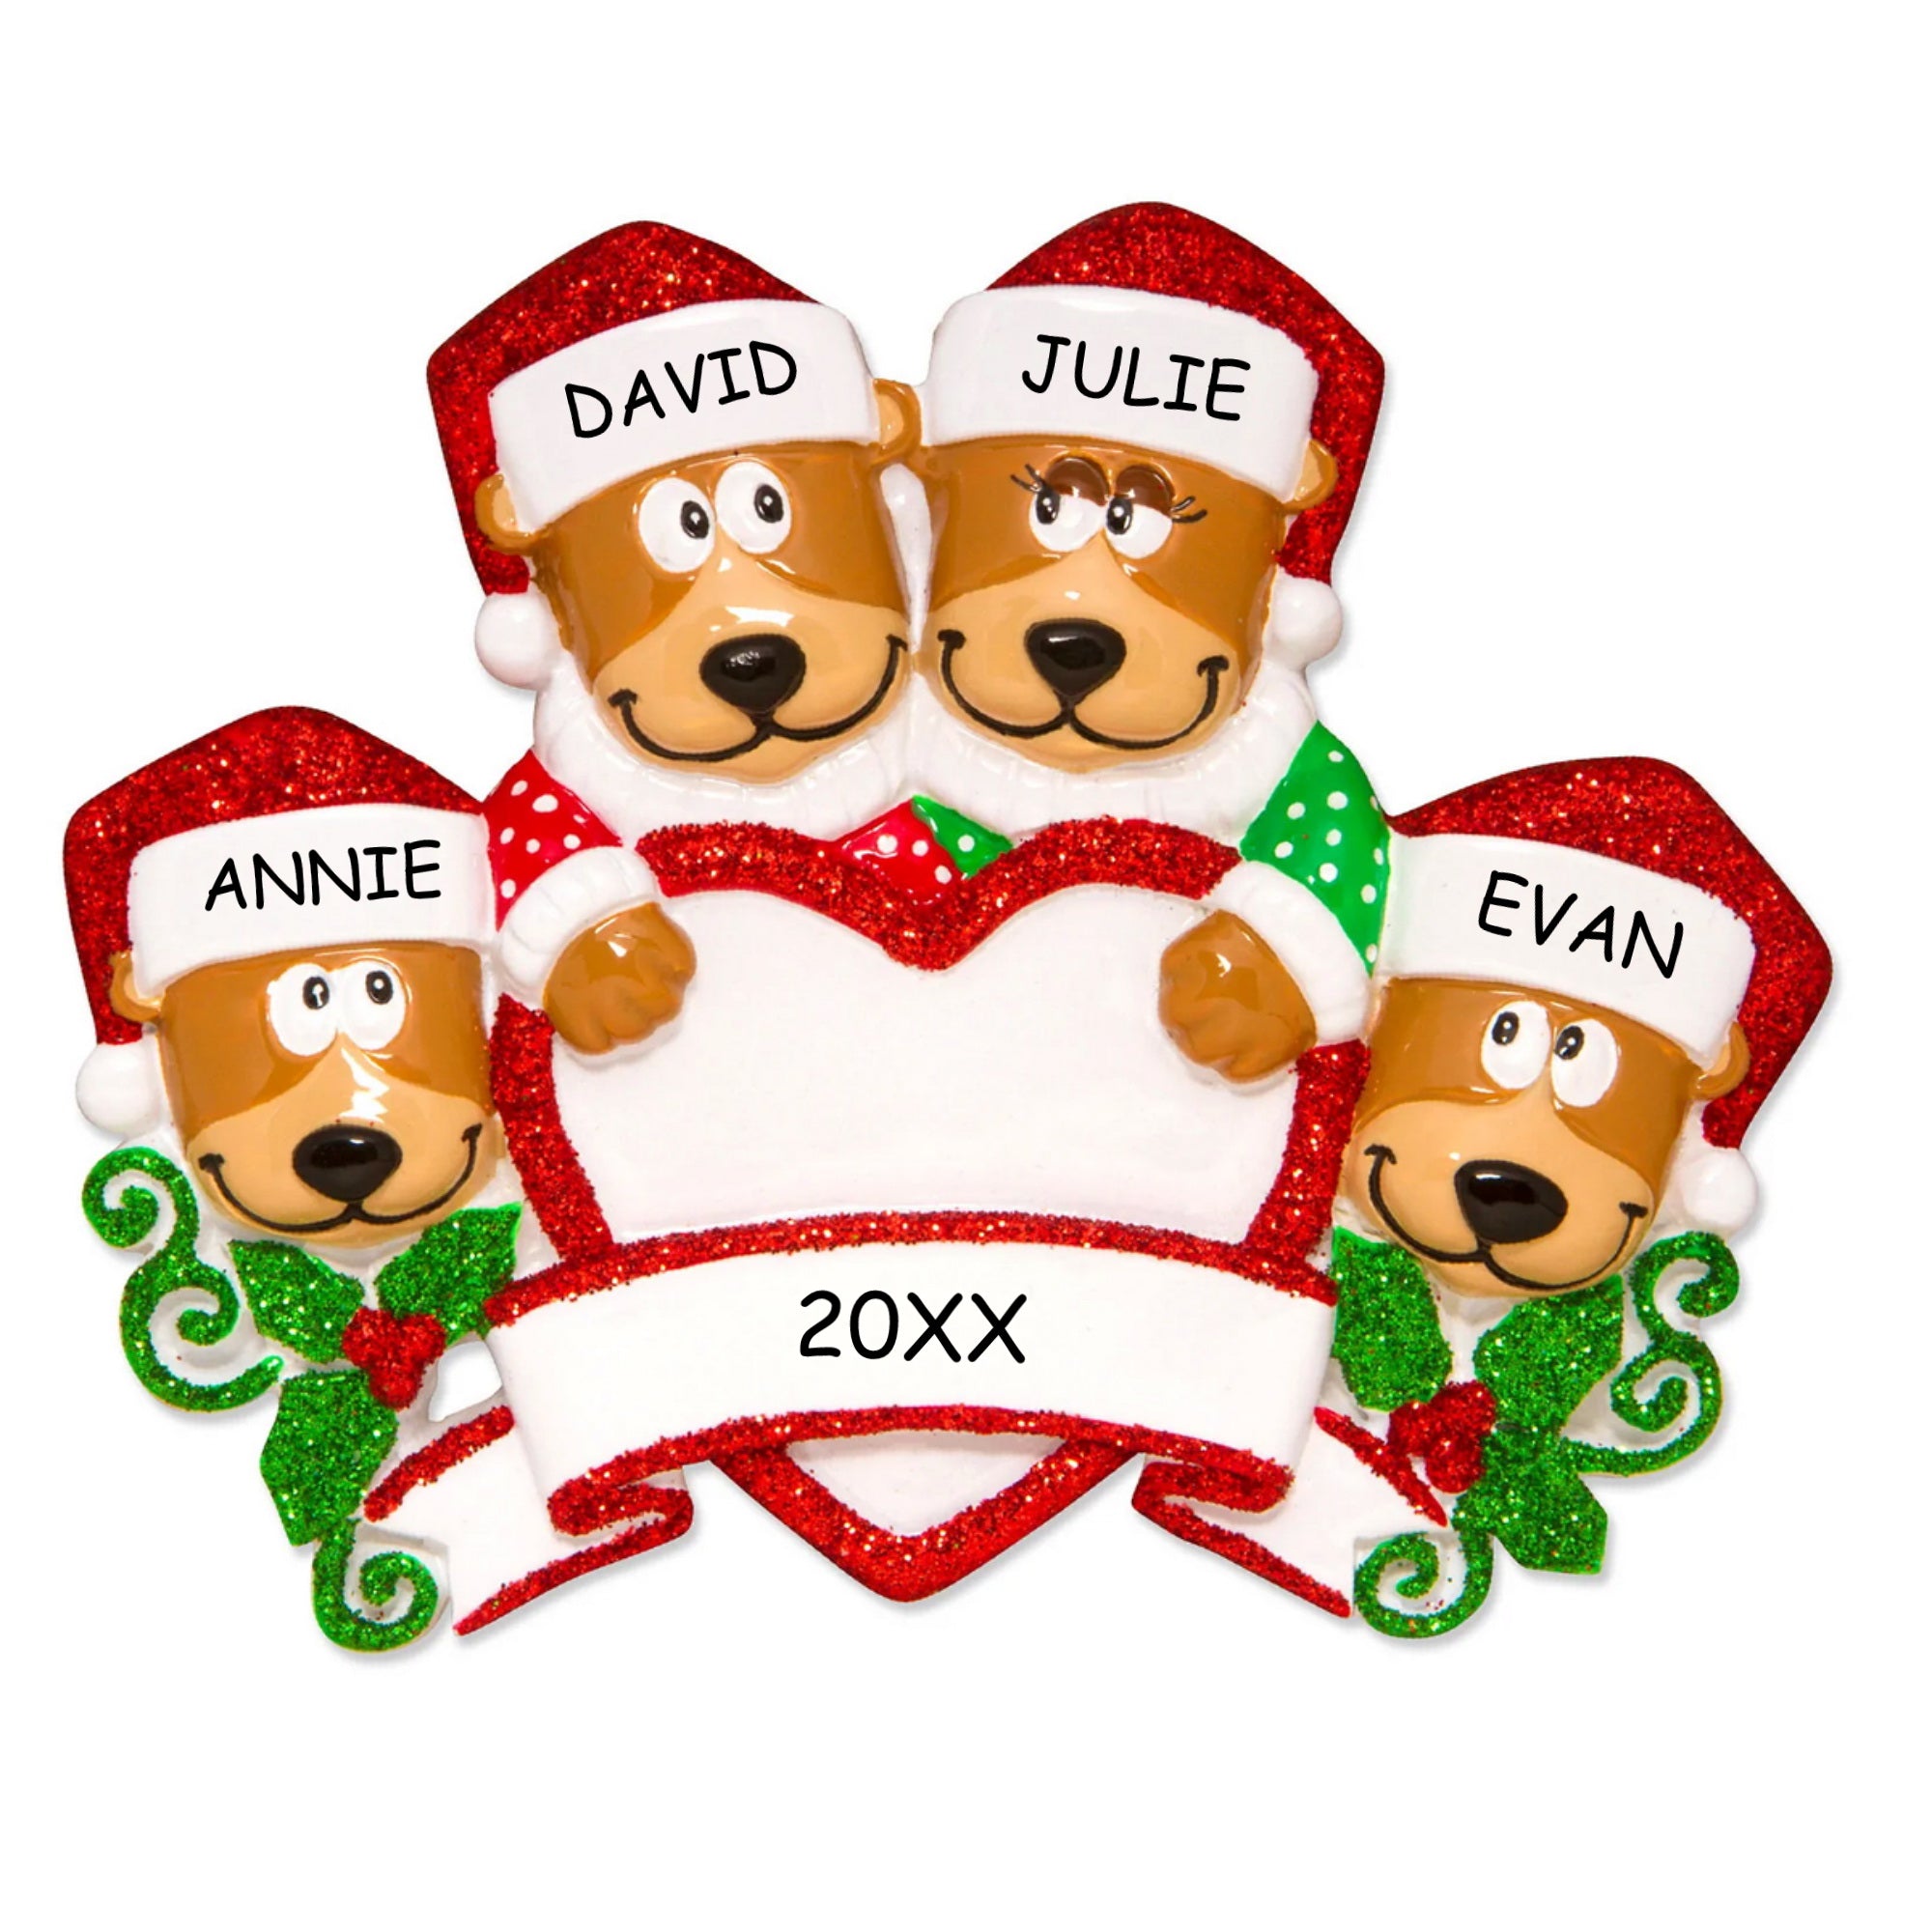 Personalized Heartwarming Bear Christmas Ornament - Family of 4